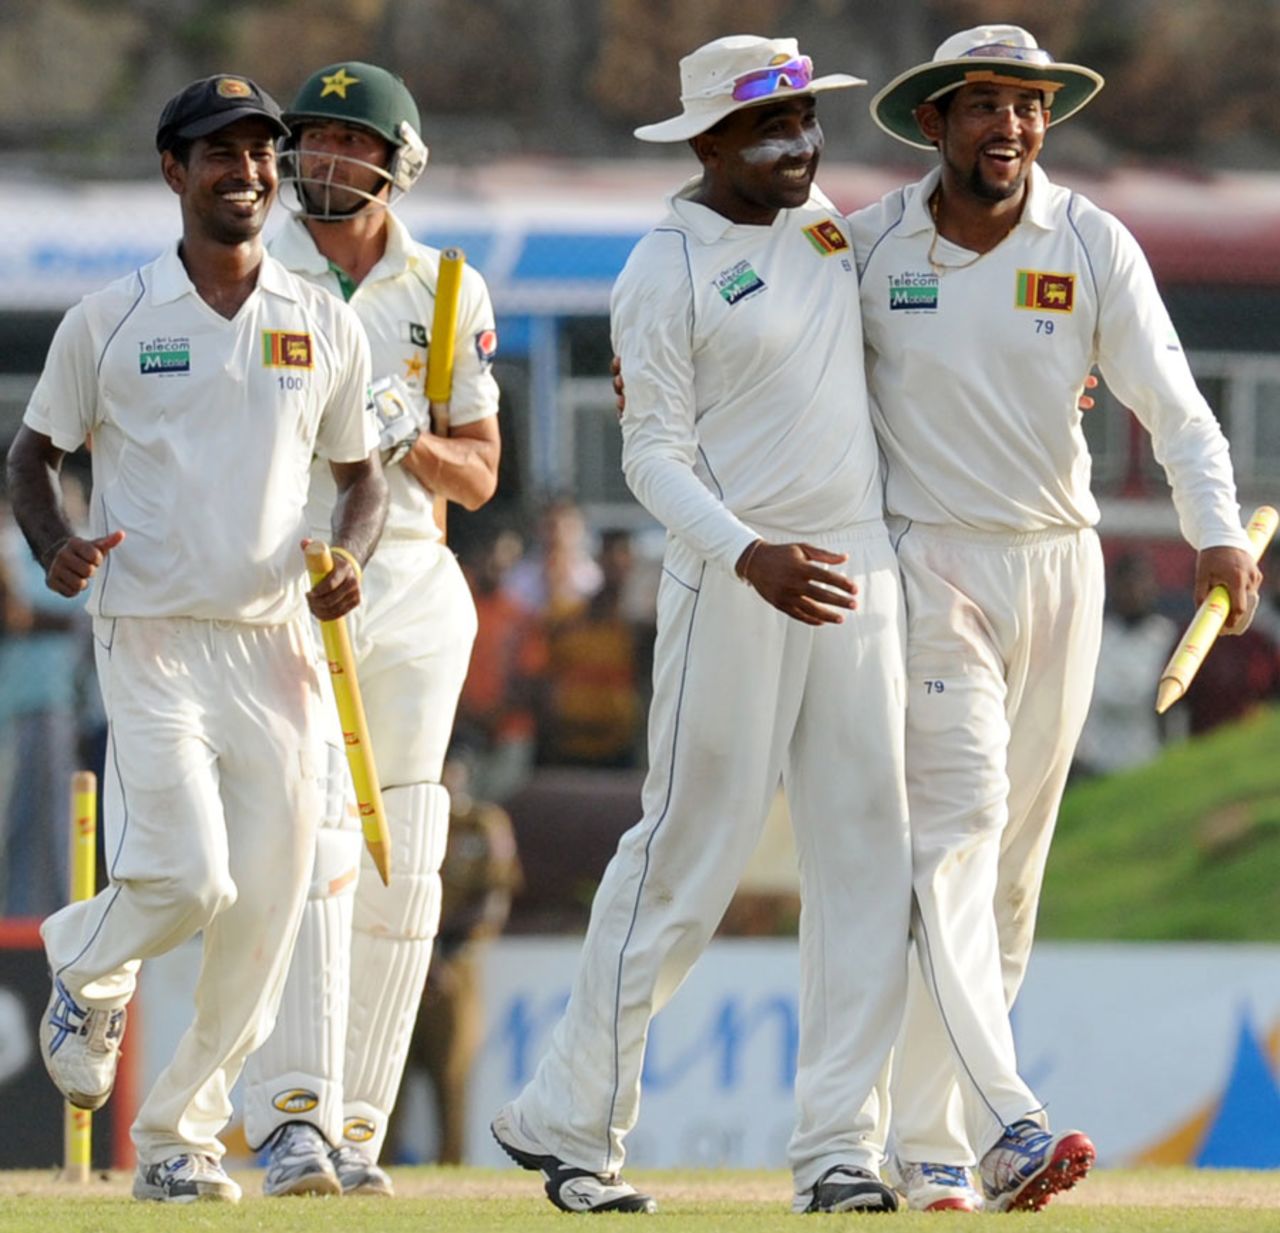 Sri Lanka are all smiles after completing a 209-run victory, Sri Lanka v Pakistan, 1st Test, Galle, 4th day, June 25, 2012